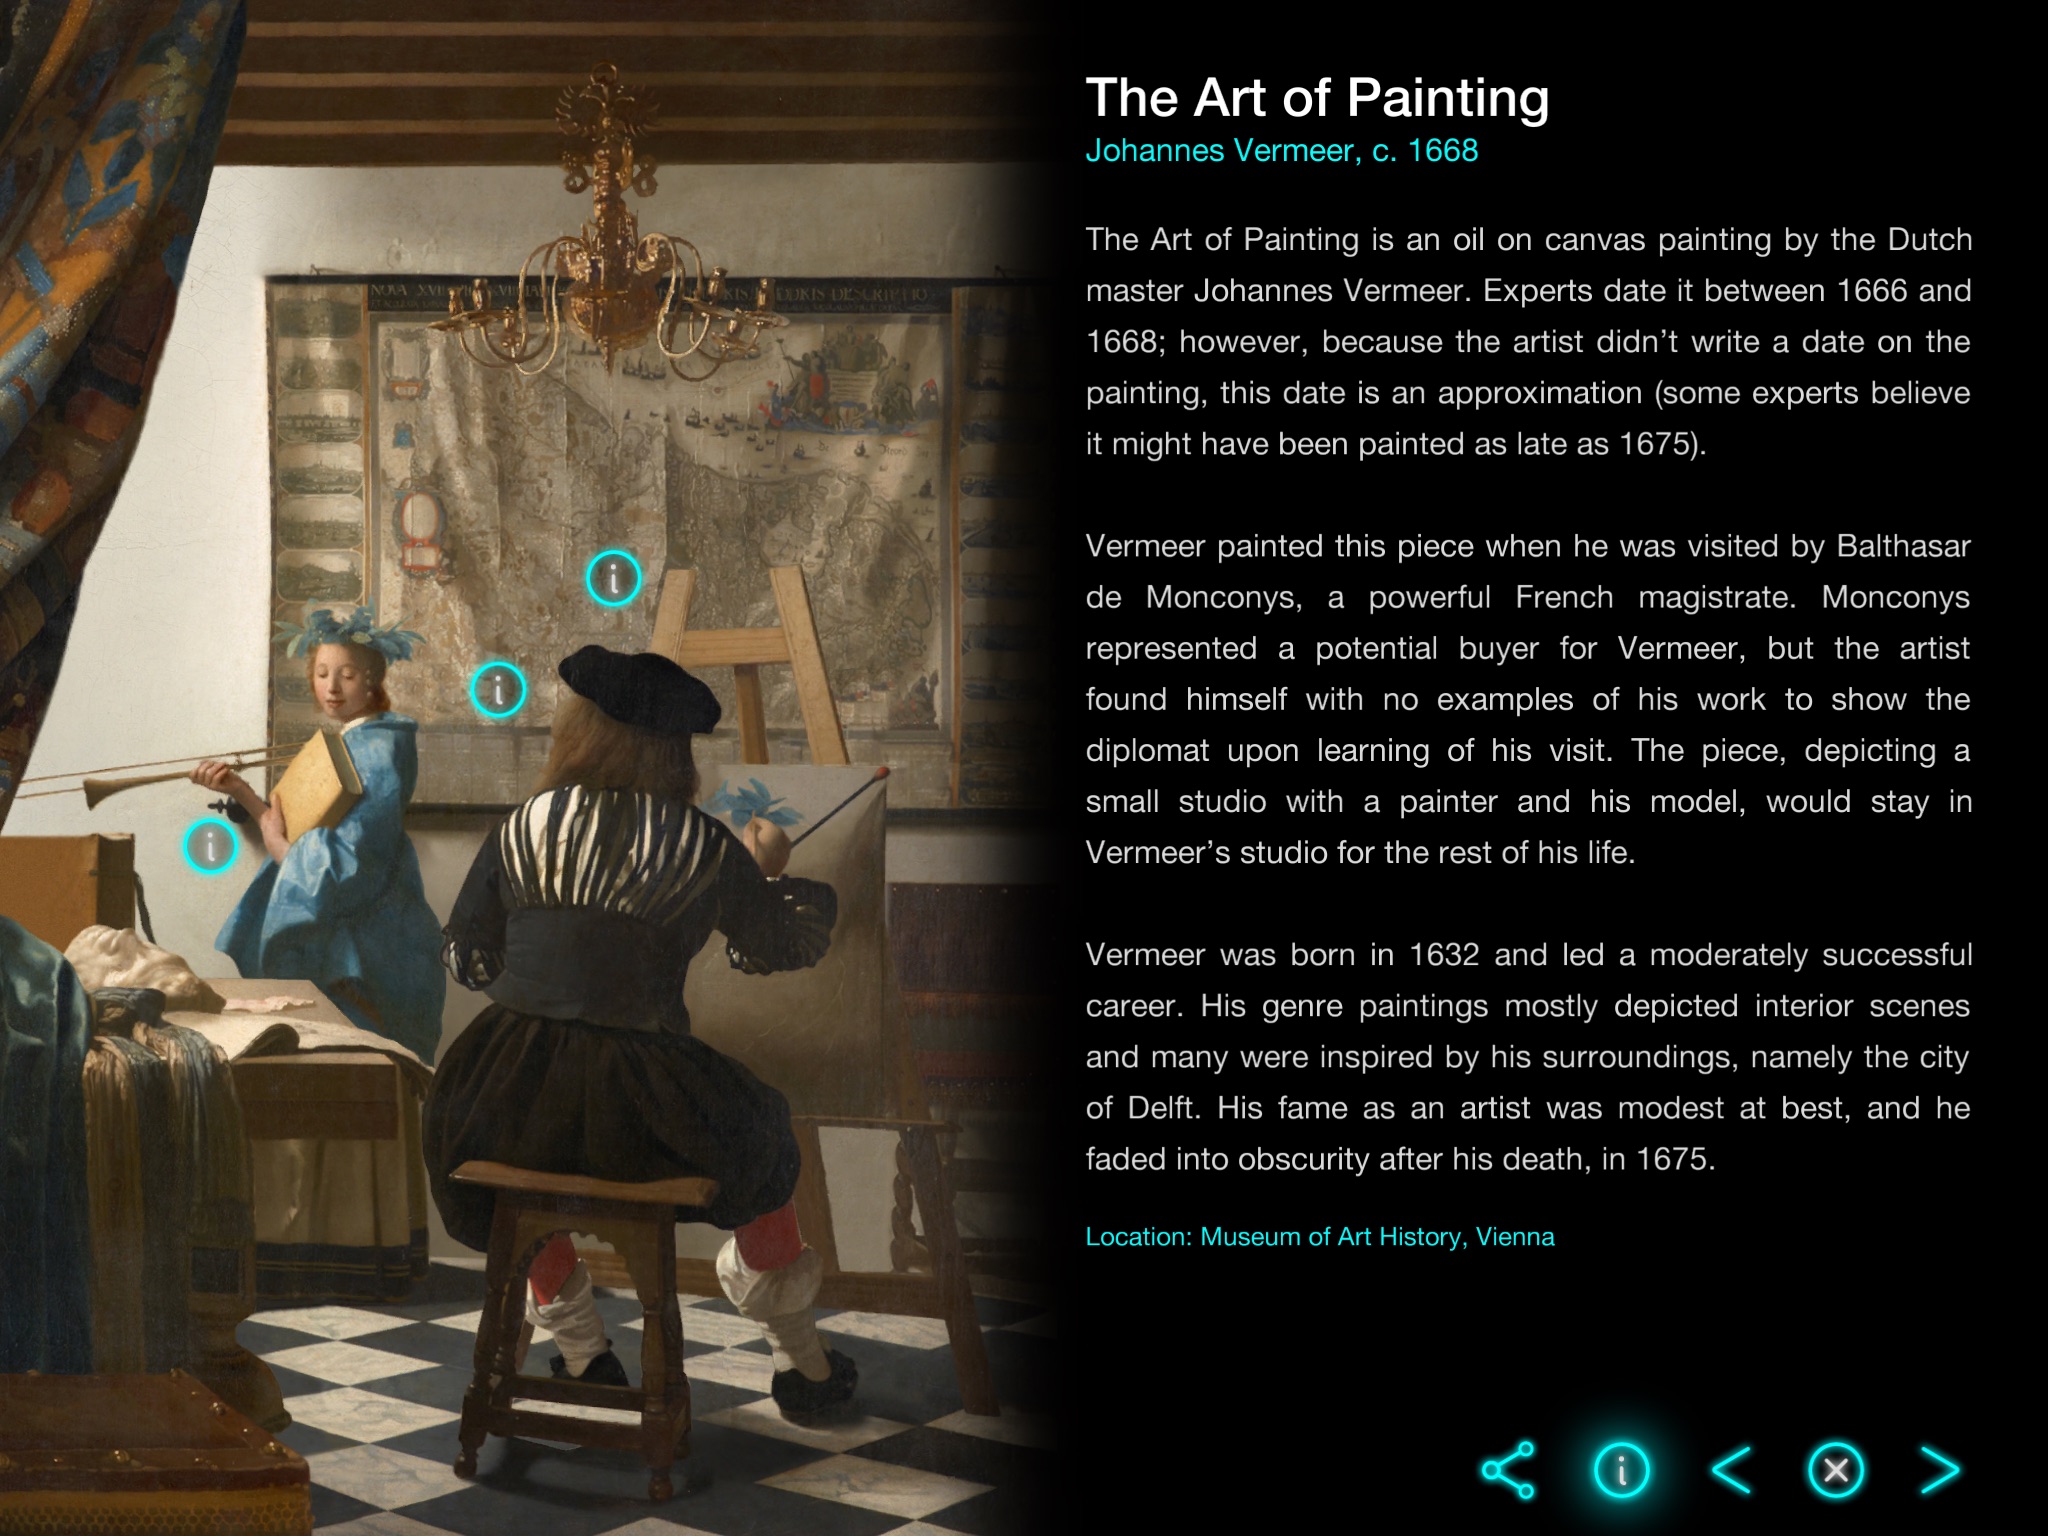 The Art of Painting by Vermeer - Art Legacy - Art History through famous Paintings - App by LANDKA ®